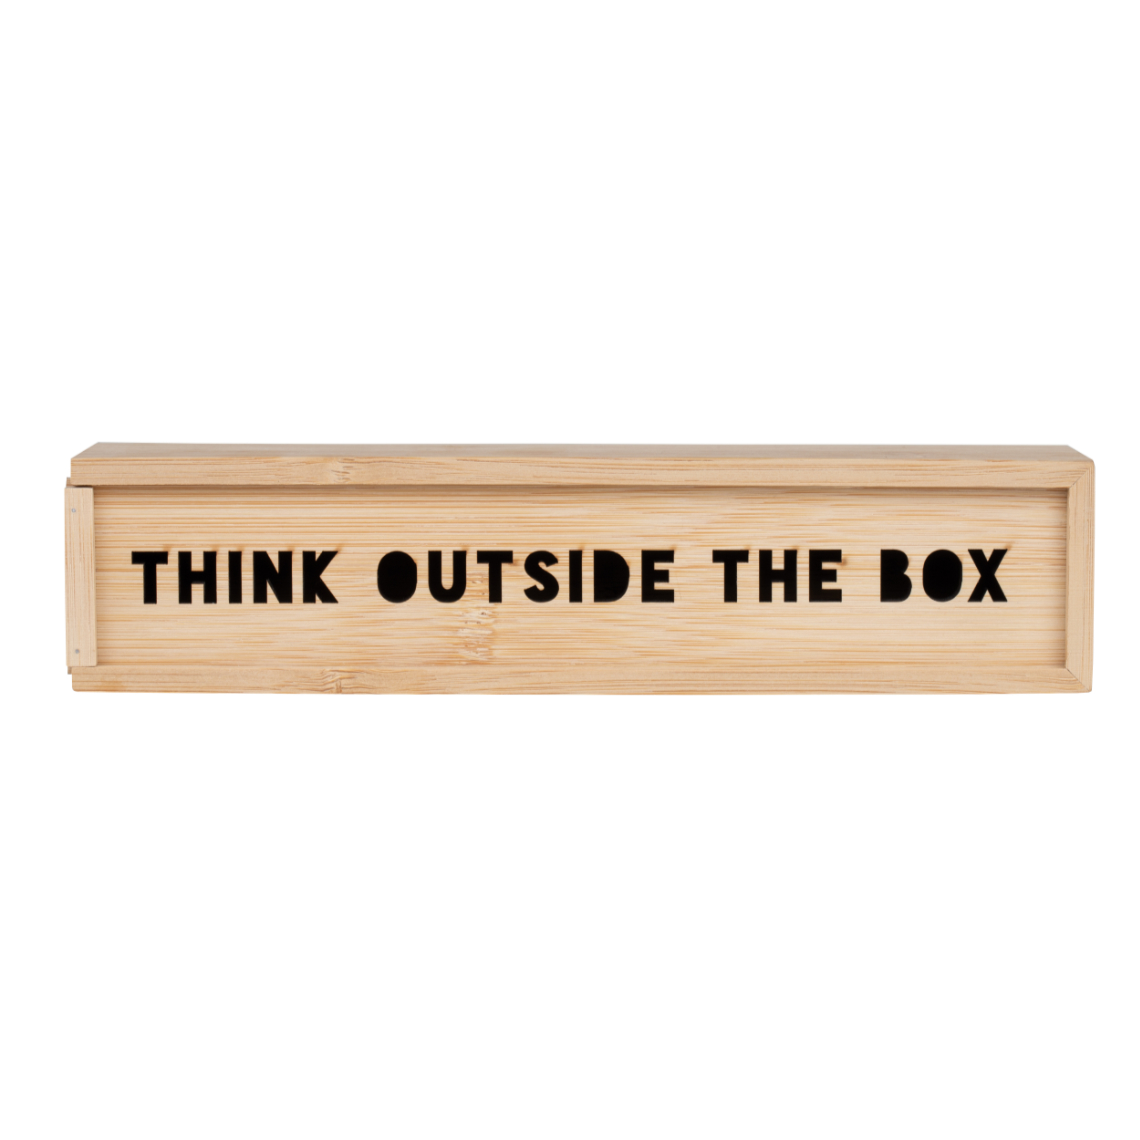 Stiftebox "Think outside the box" 